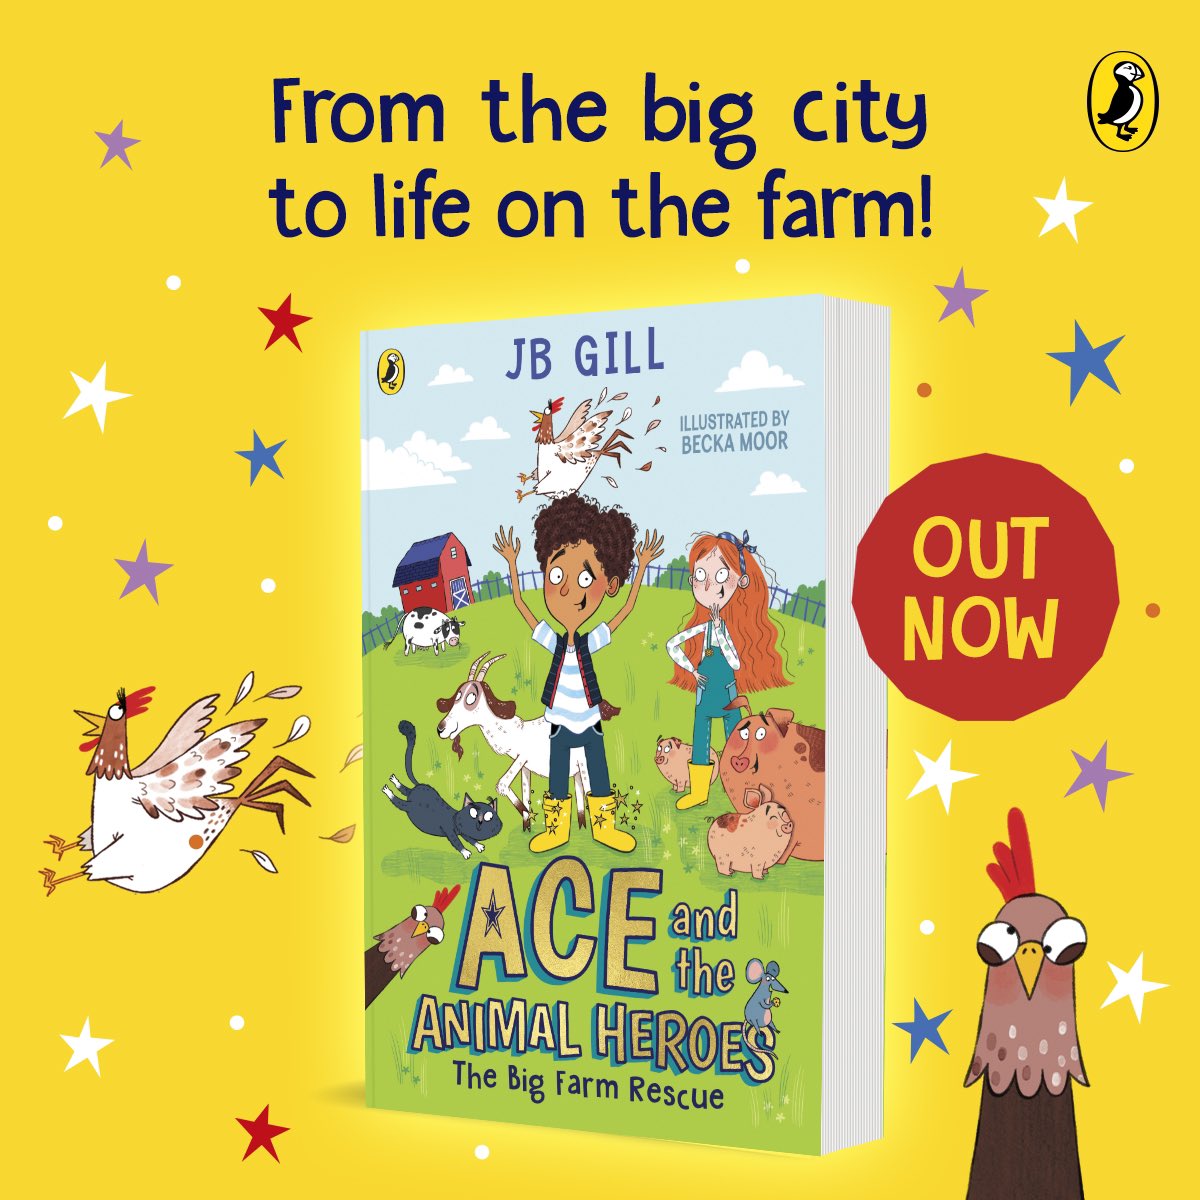 It’s Publication Day!! Excited for you all to receive you copies of #AceAndTheAnimalHeroes ‘The Big Farm Rescue’ 🎉 Can’t wait for you to get stuck into the muck & magic of the farm!! ✨📖